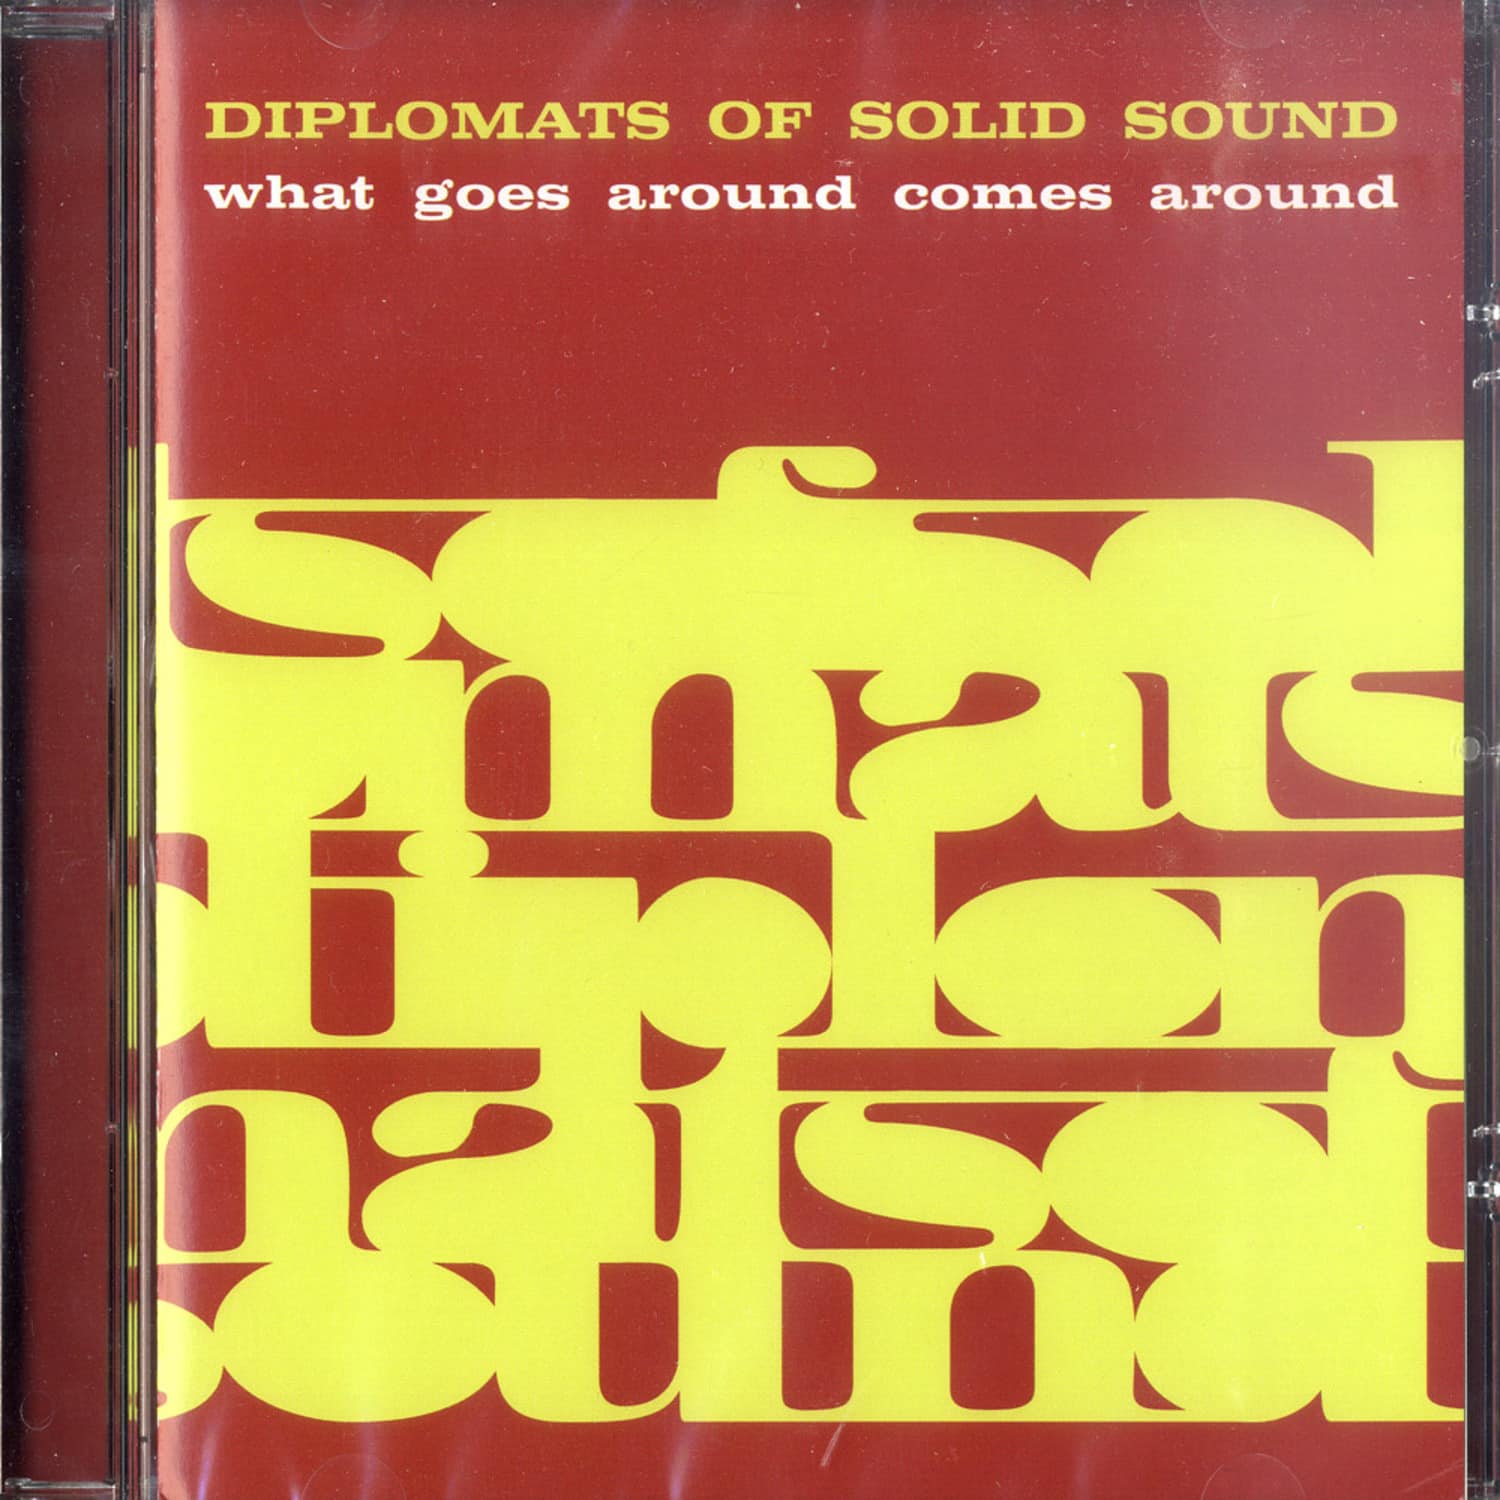 Diplomats Of Solid Sound - WHAT GOES AROUND COMES AROUND 